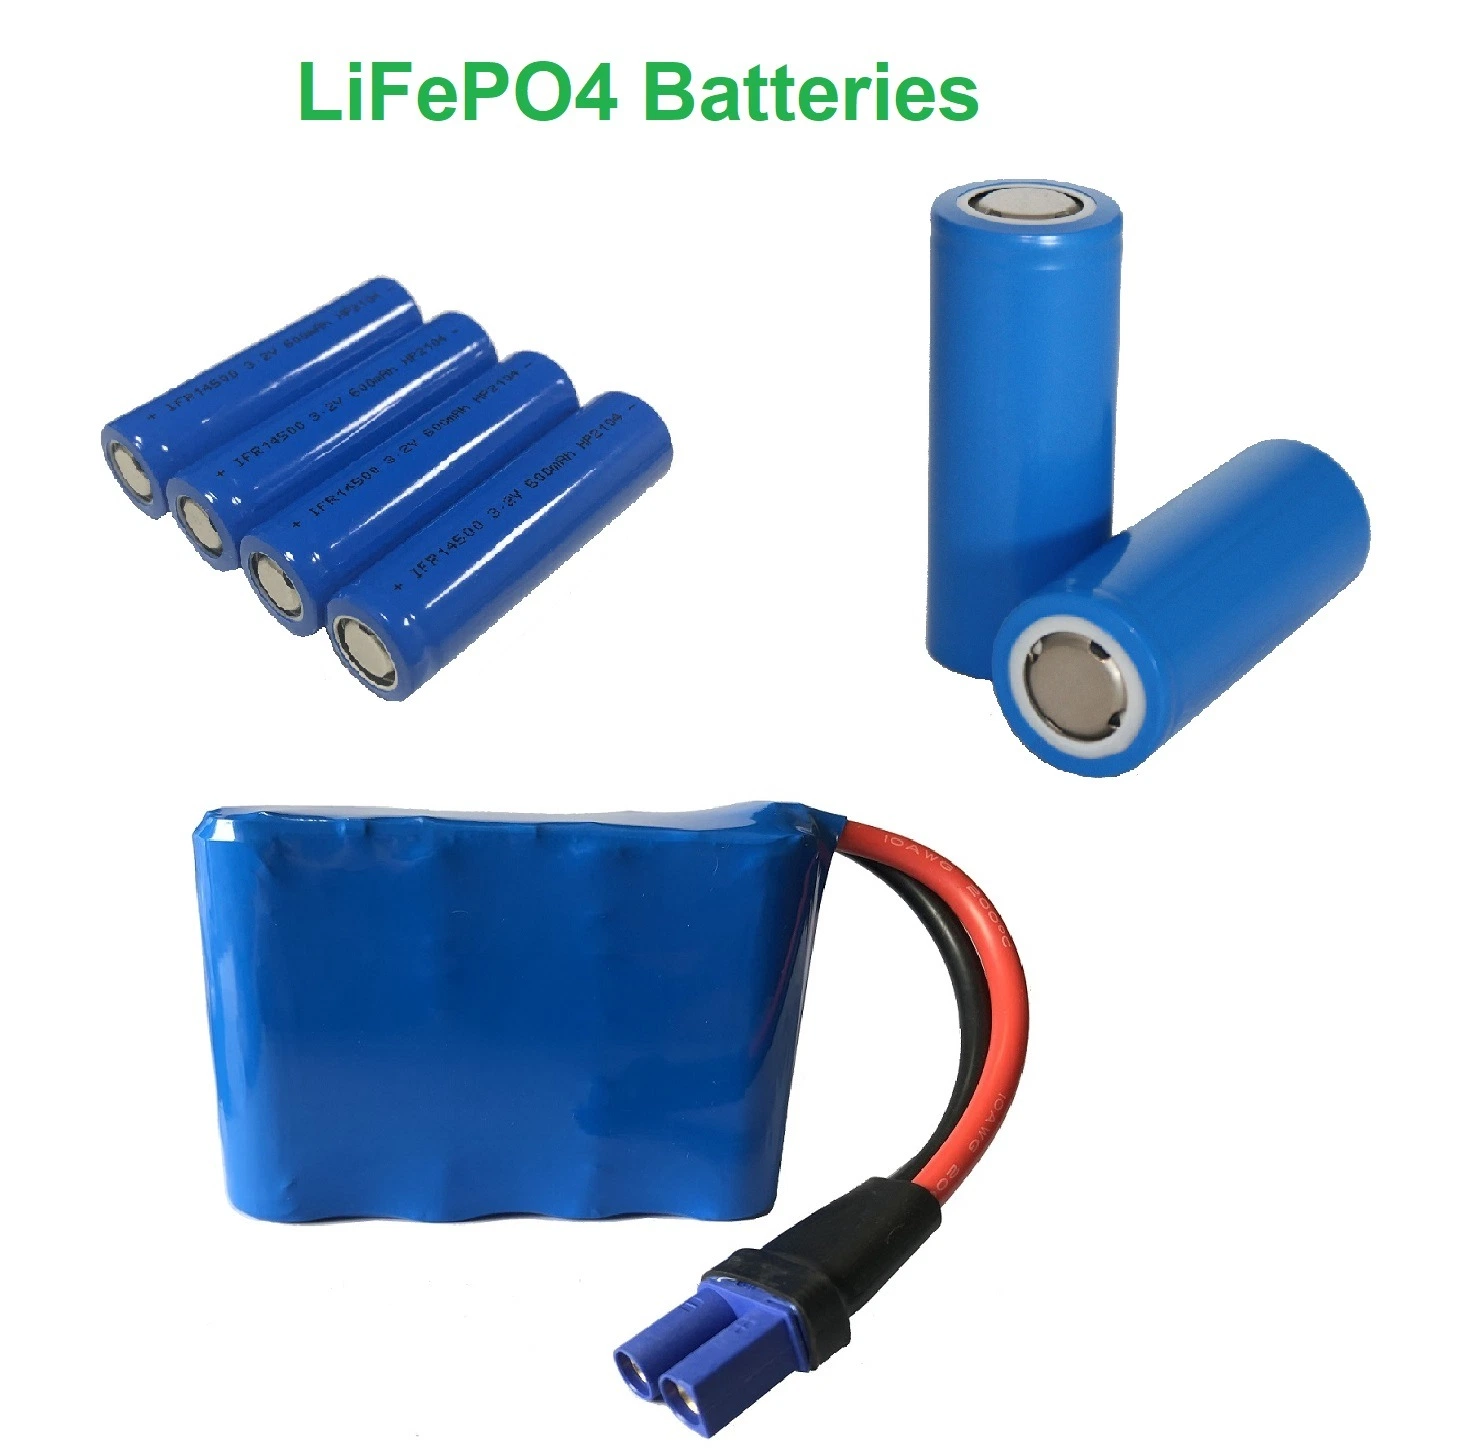 Lithium Ion Polymer Battery Storage Battery Charger 32700 LiFePO4 Battery